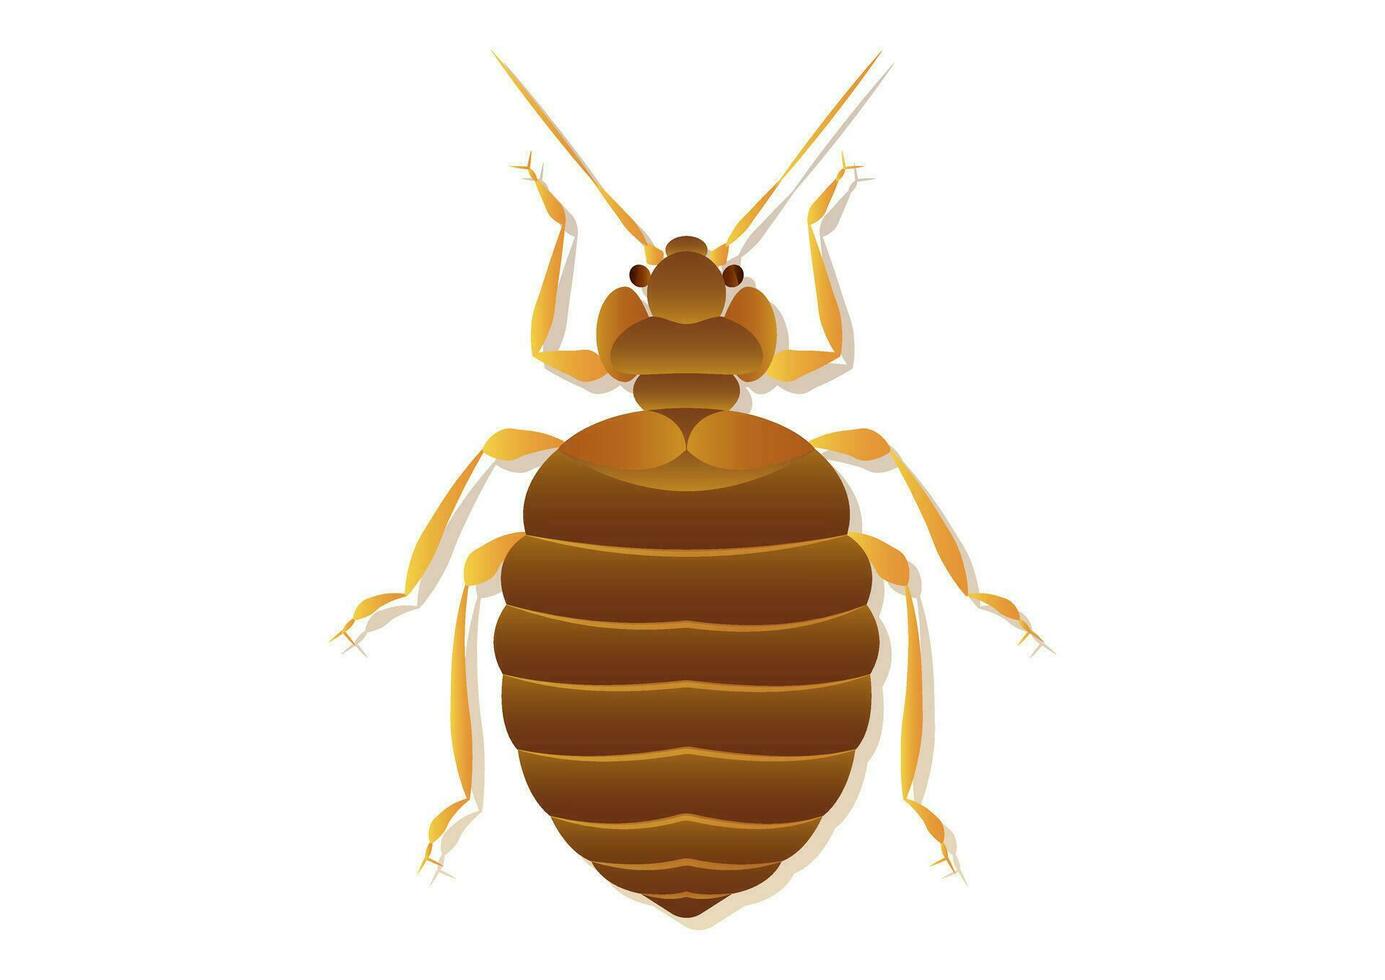 Bed Bug Vector Art Isolated on White Background